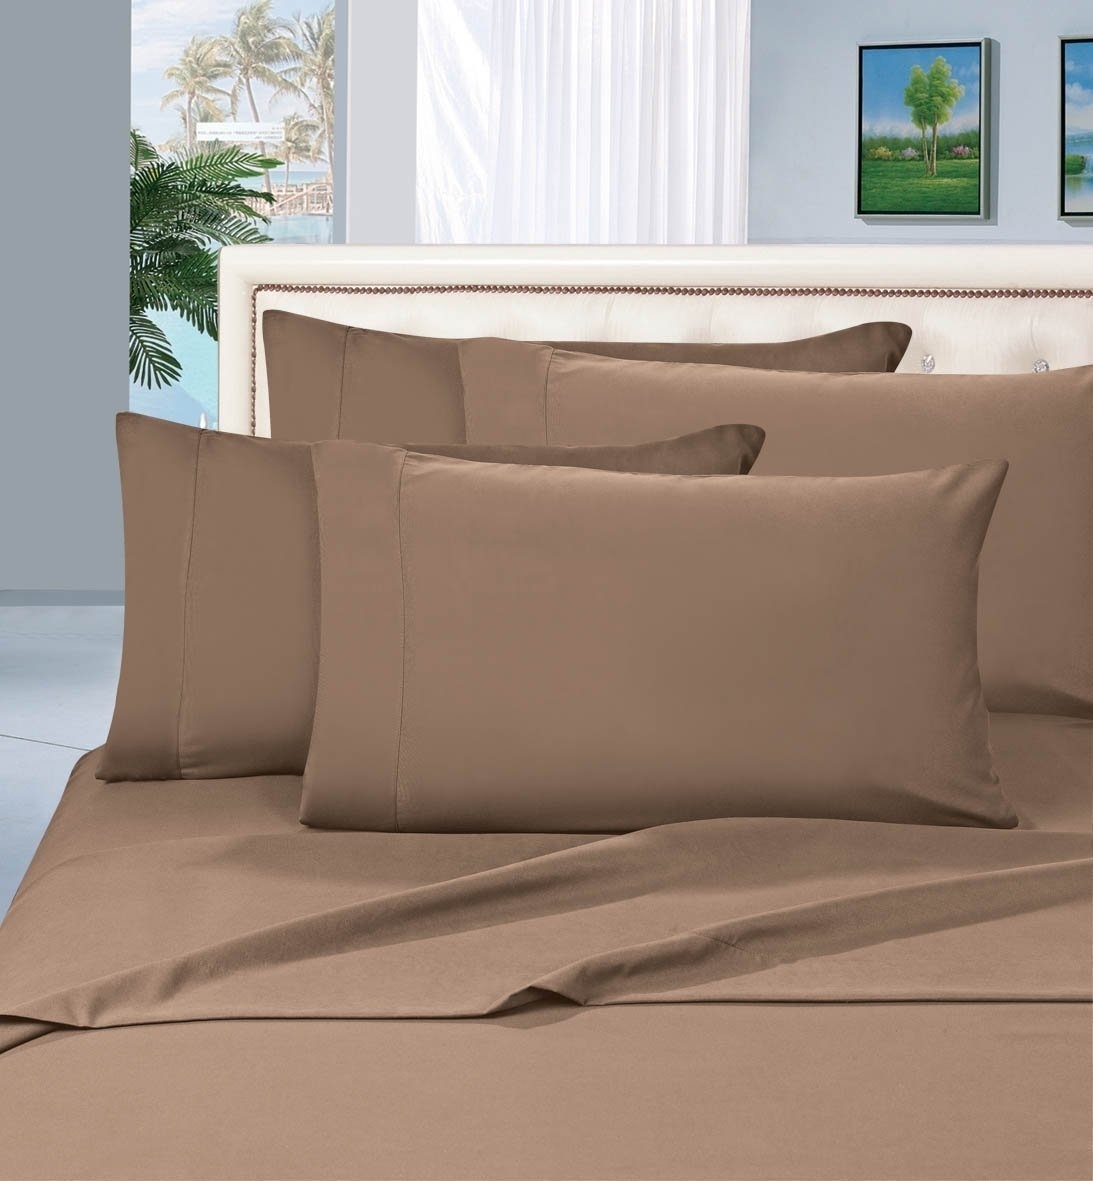 Elegant Comfort 1500 Series Wrinkle Resistant Egyptian Quality Hypoallergenic Ultra Soft Luxury 4-piece Bed Sheet Set, Full, Taupe